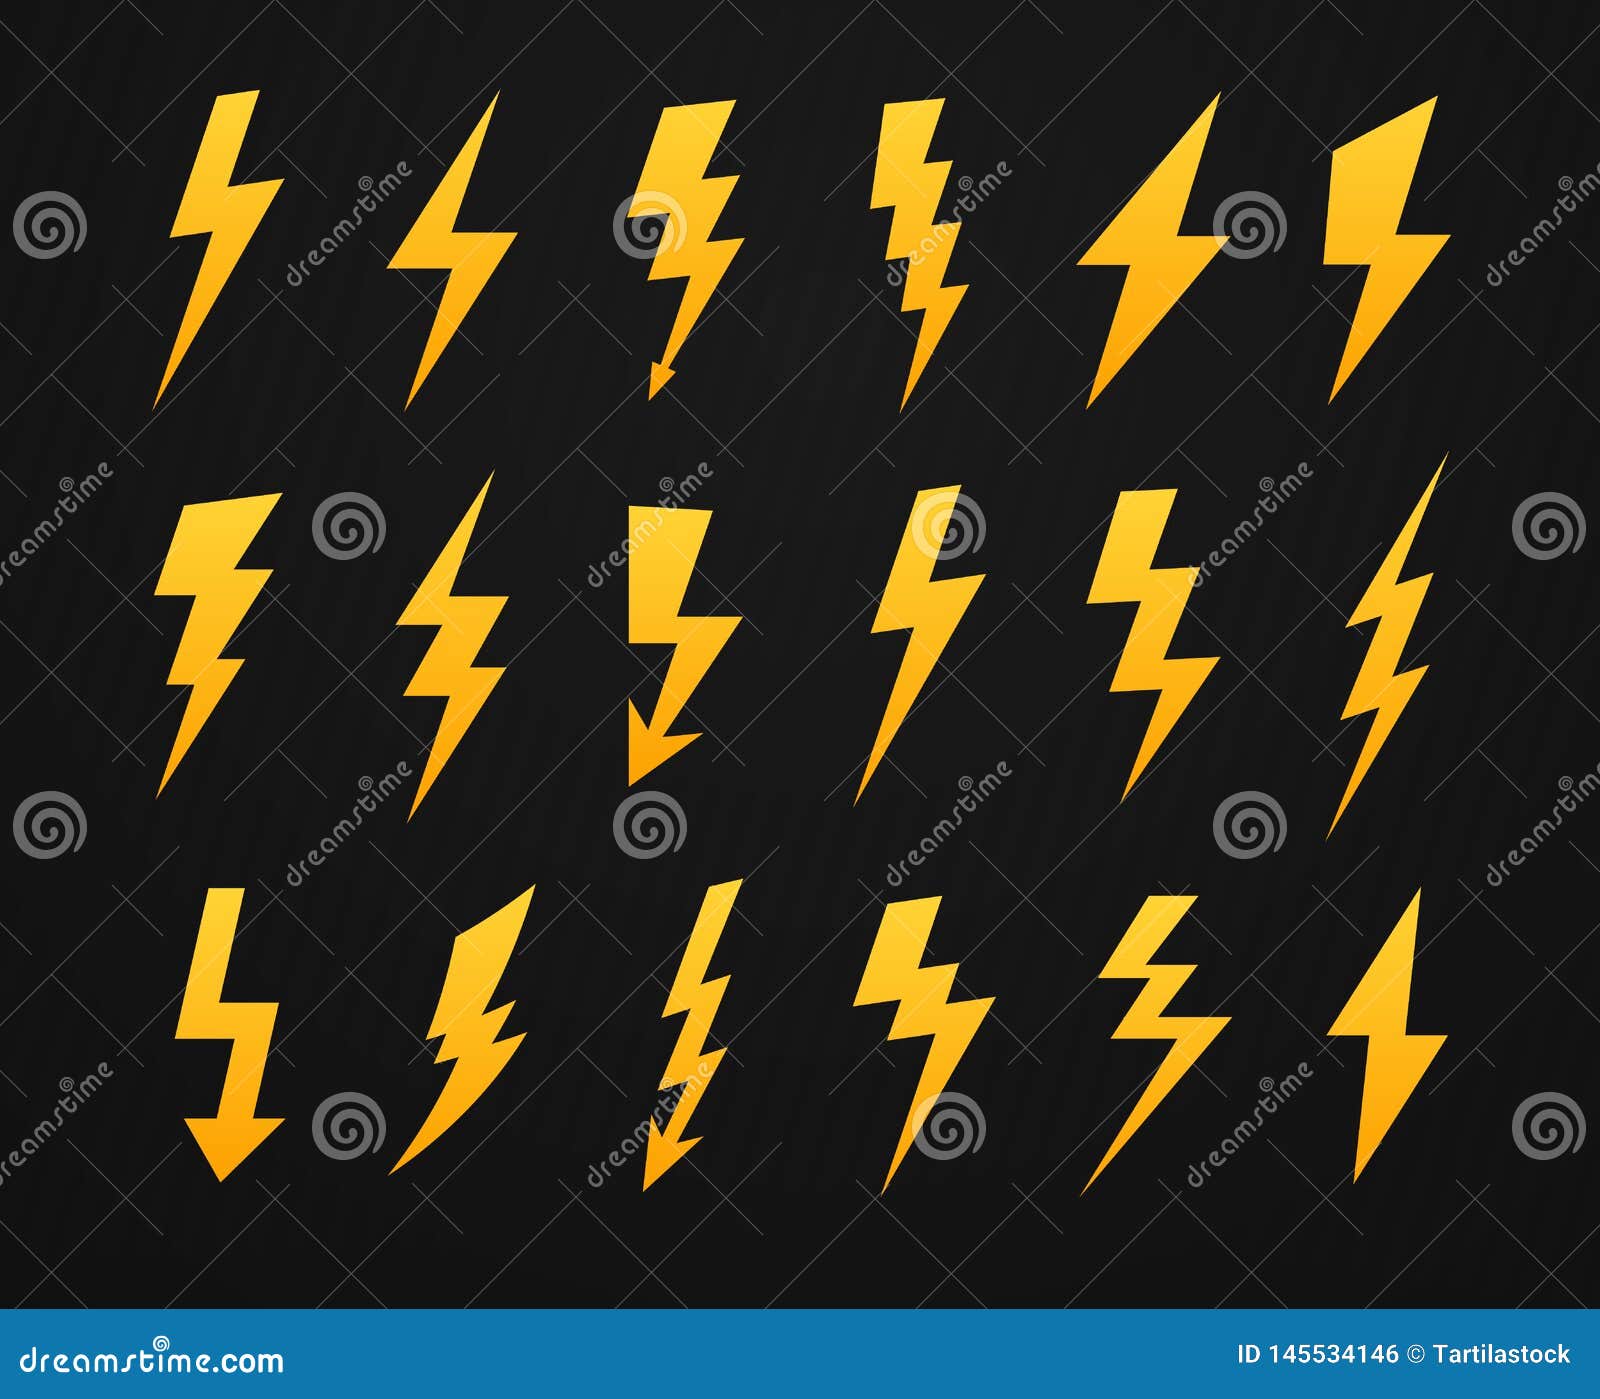 yellow lightning silhouette. electrical power high voltage, thunderbolt flash and energy lightnings silhouettes icons